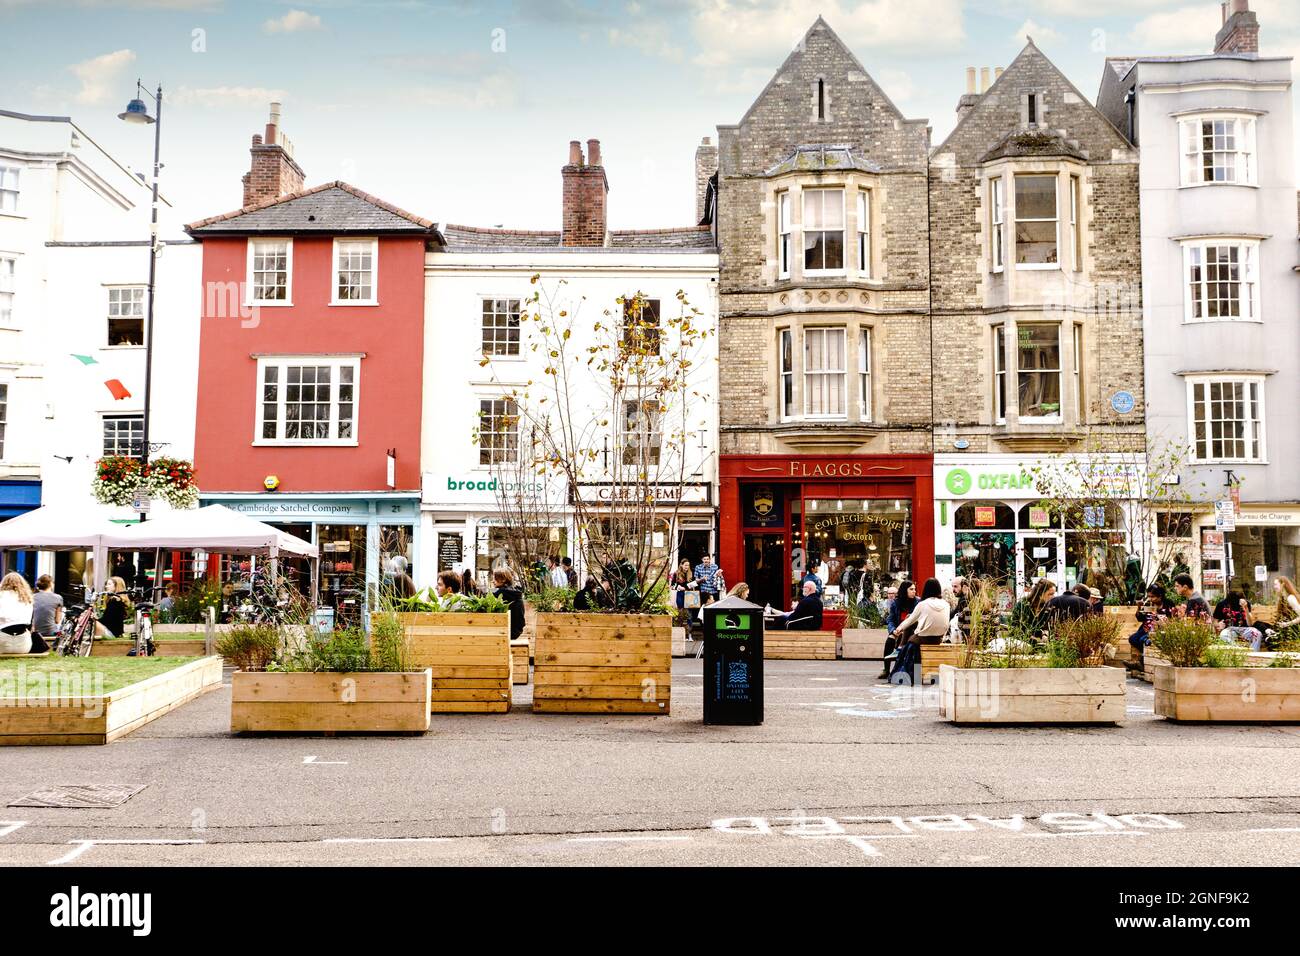 Broad Meadow on Broad Street Oxford. Covid vaccine crates refashioned as seating. Stock Photo